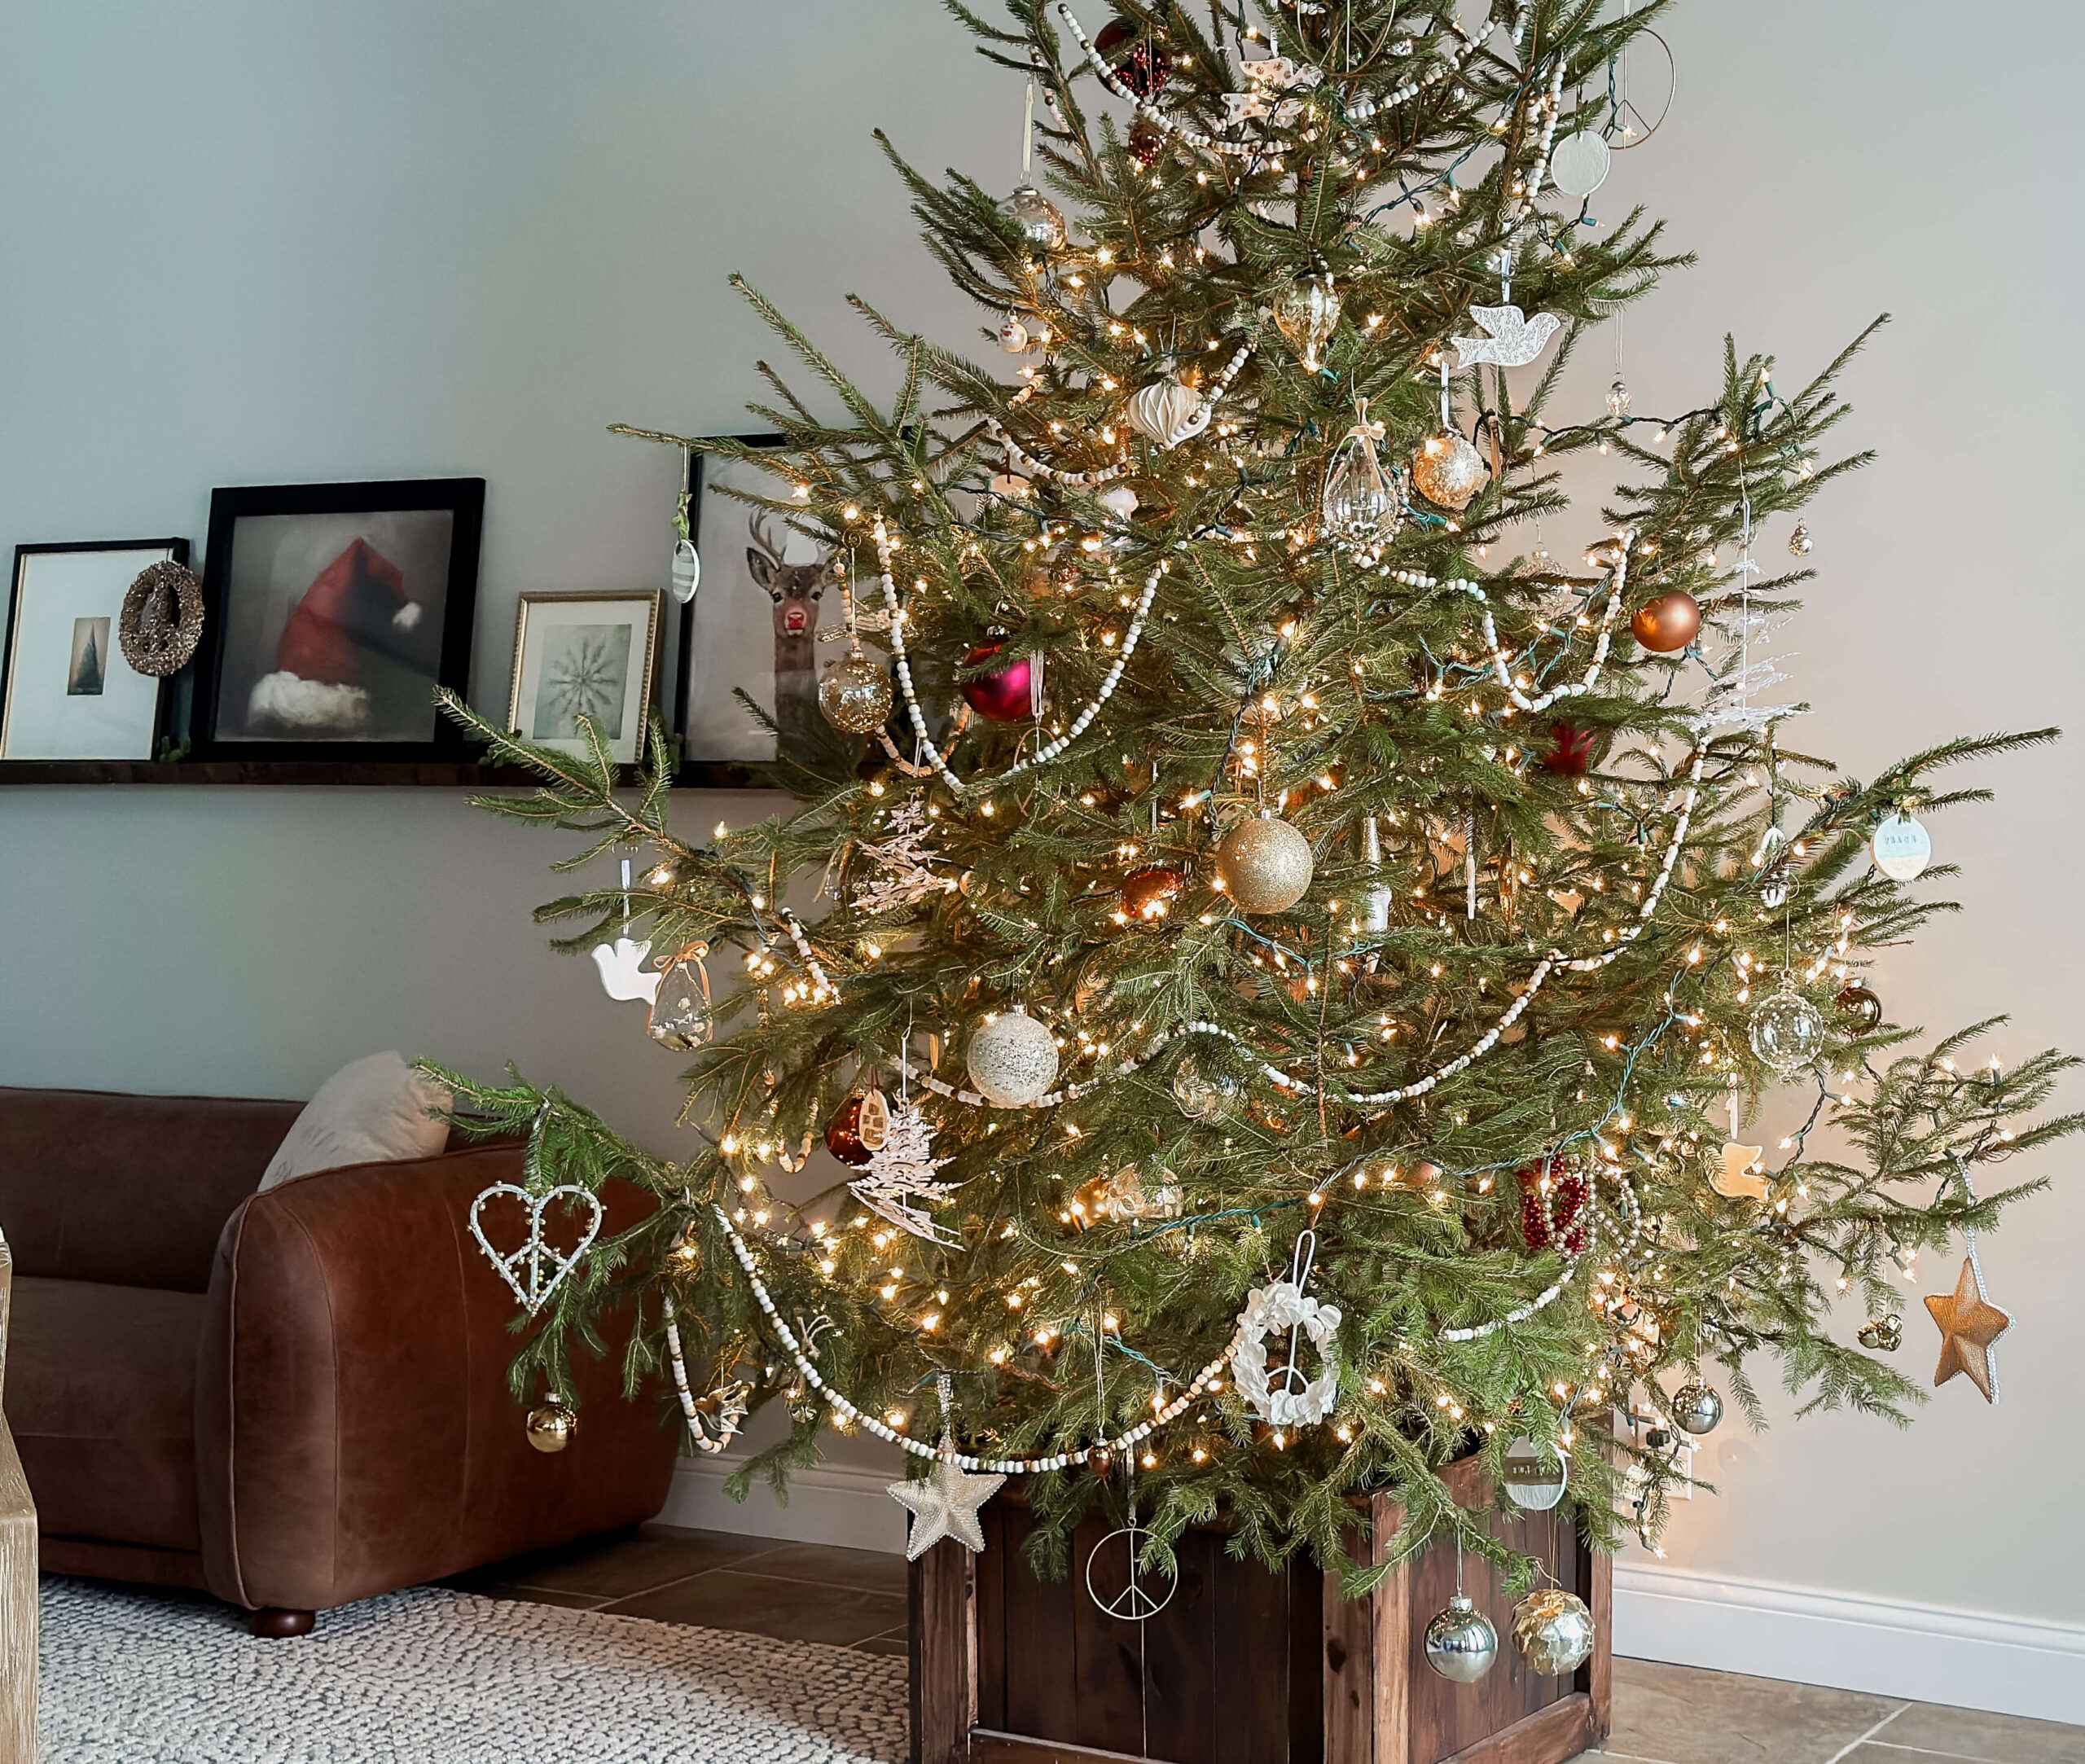 Fresh Christmas tree decorated with natural elements.